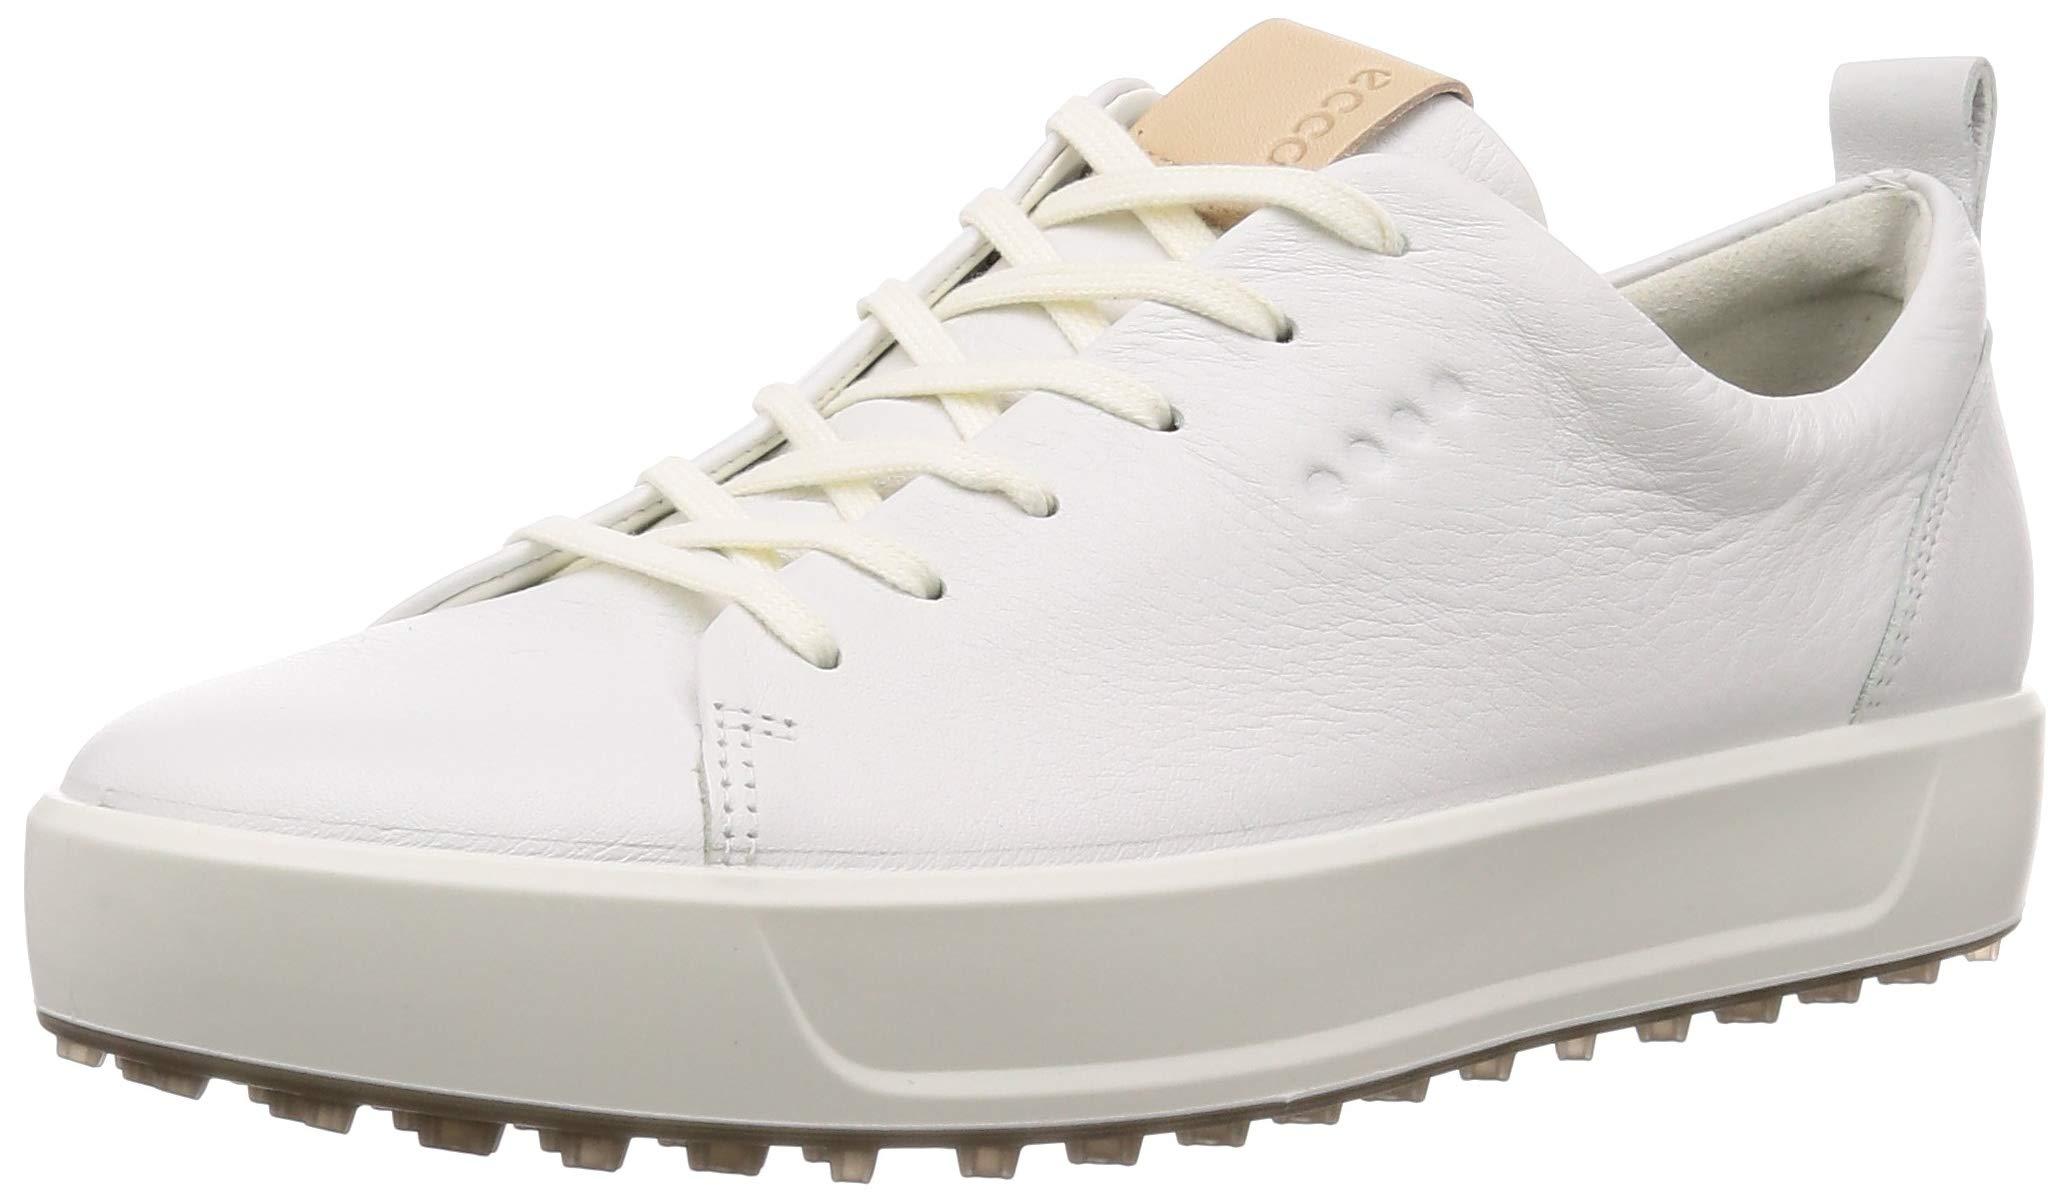 Ecco Synthetic Soft Hydromax Golf Shoe in Bright White (White) for Men -  Lyst